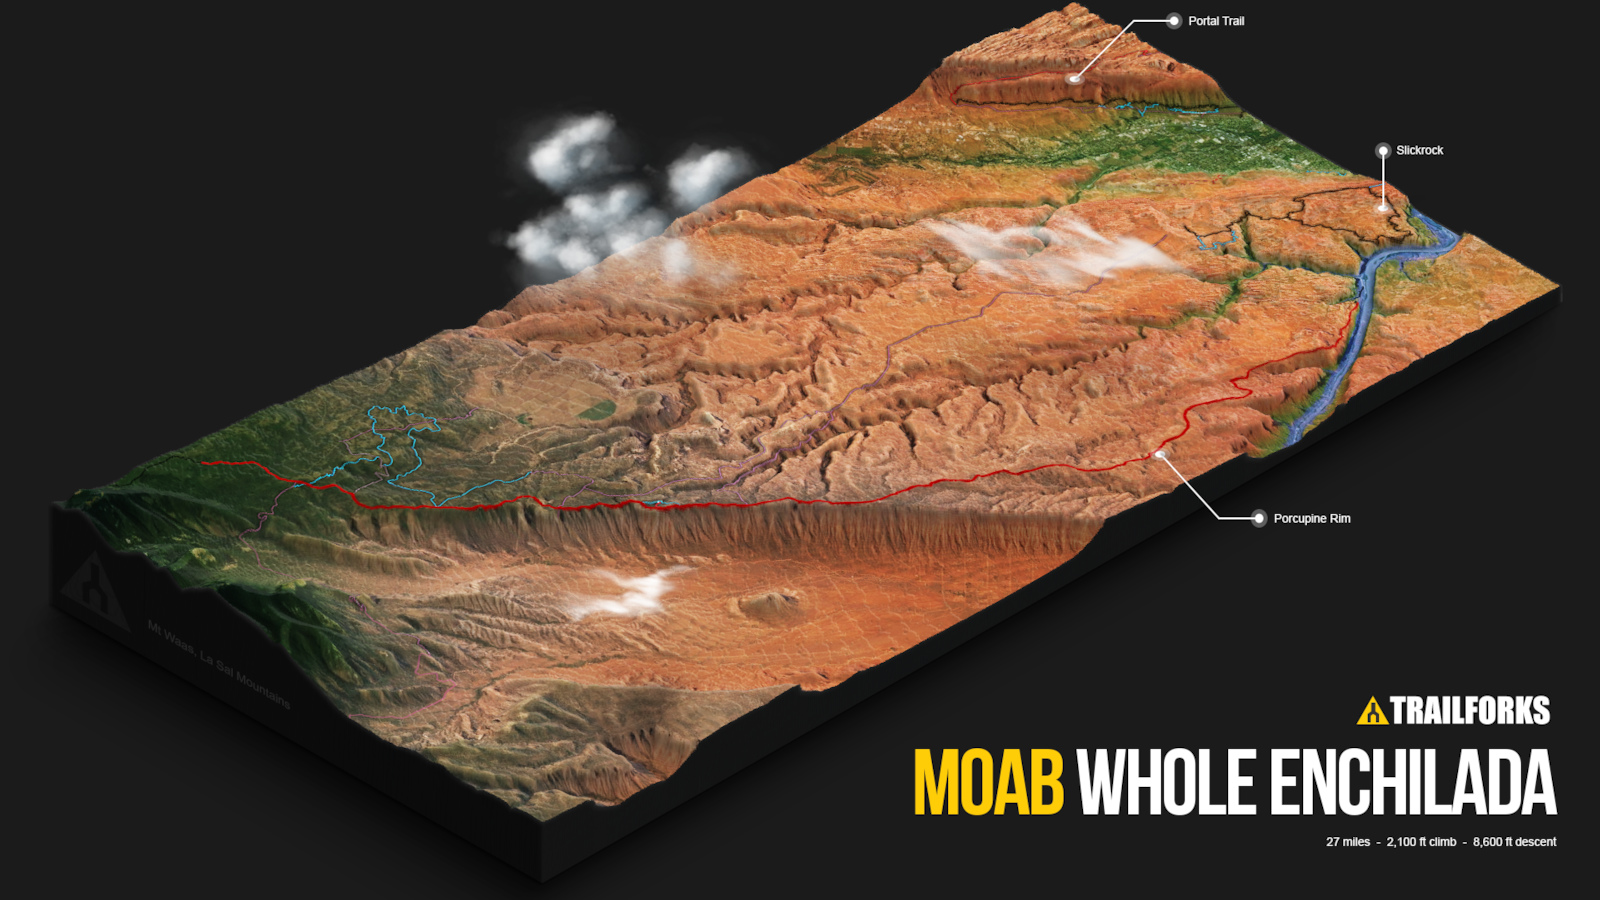 Stylized 3D map of Moab Whole Enchilada area with trails overlayed. 1920x1080 wallpaper.

Photoshop scratch disk was using 80GB working on the file, PSD is 450 MB.